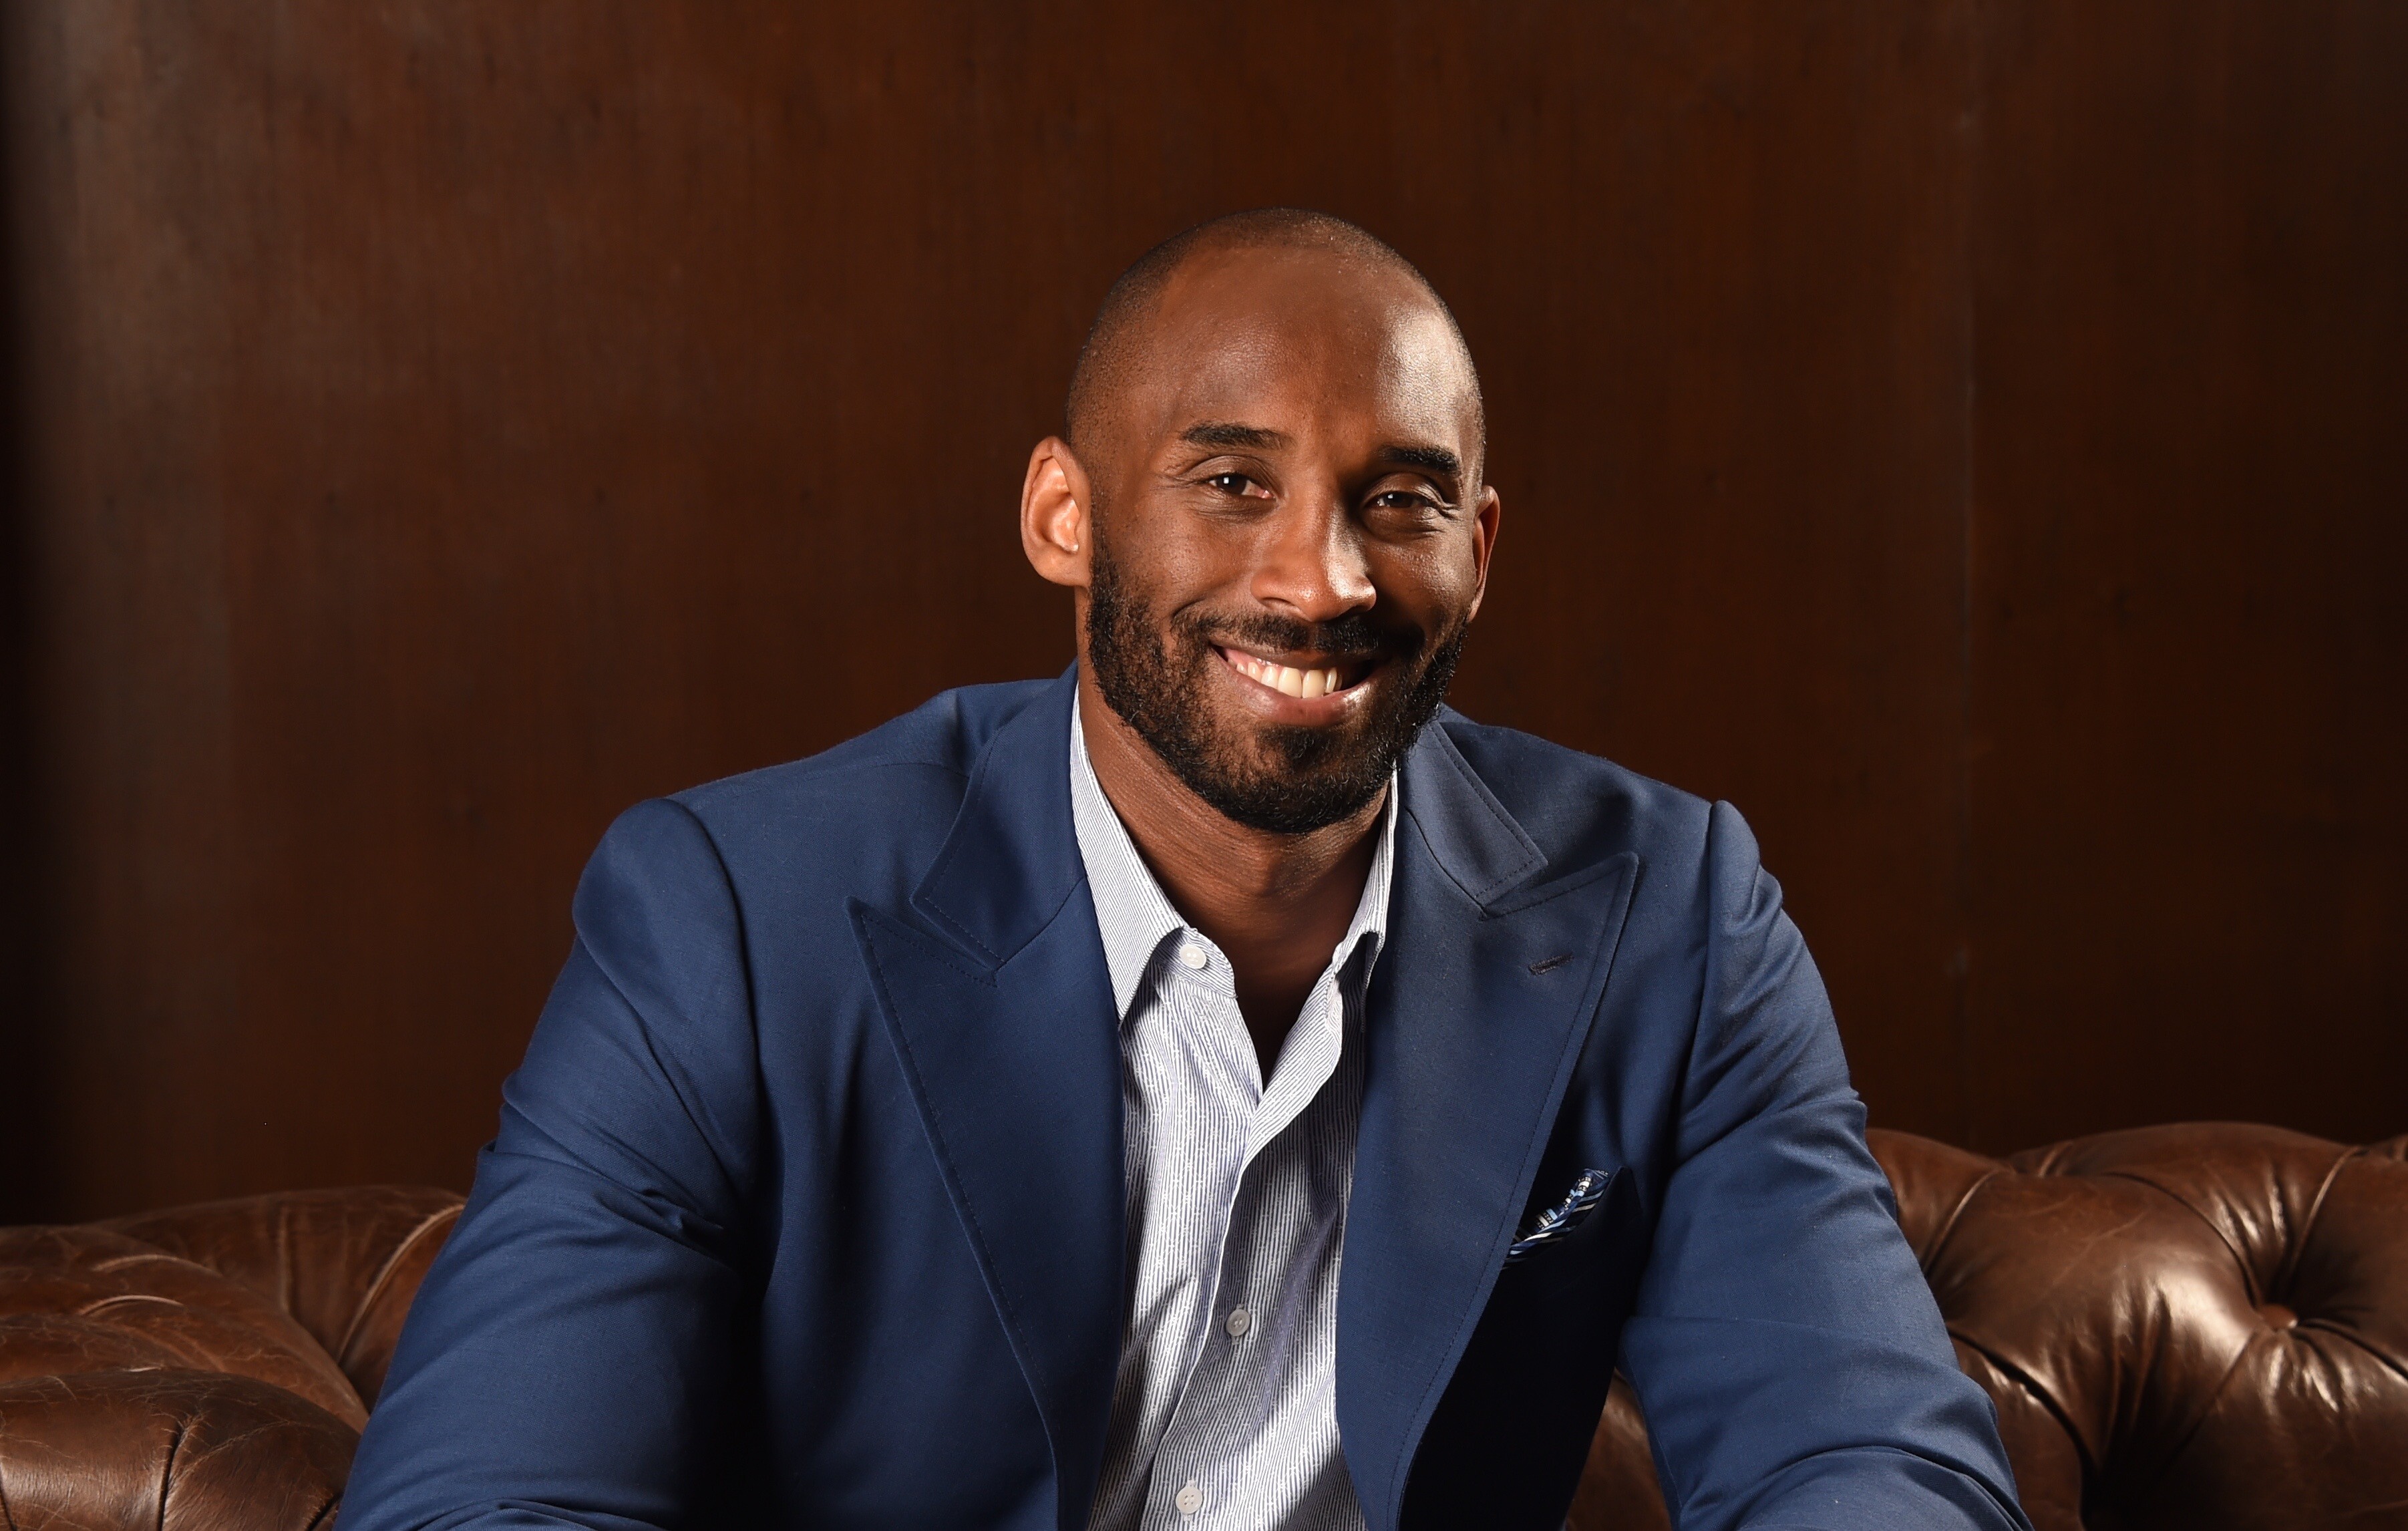 A smiling Kobe Bryant talking about success